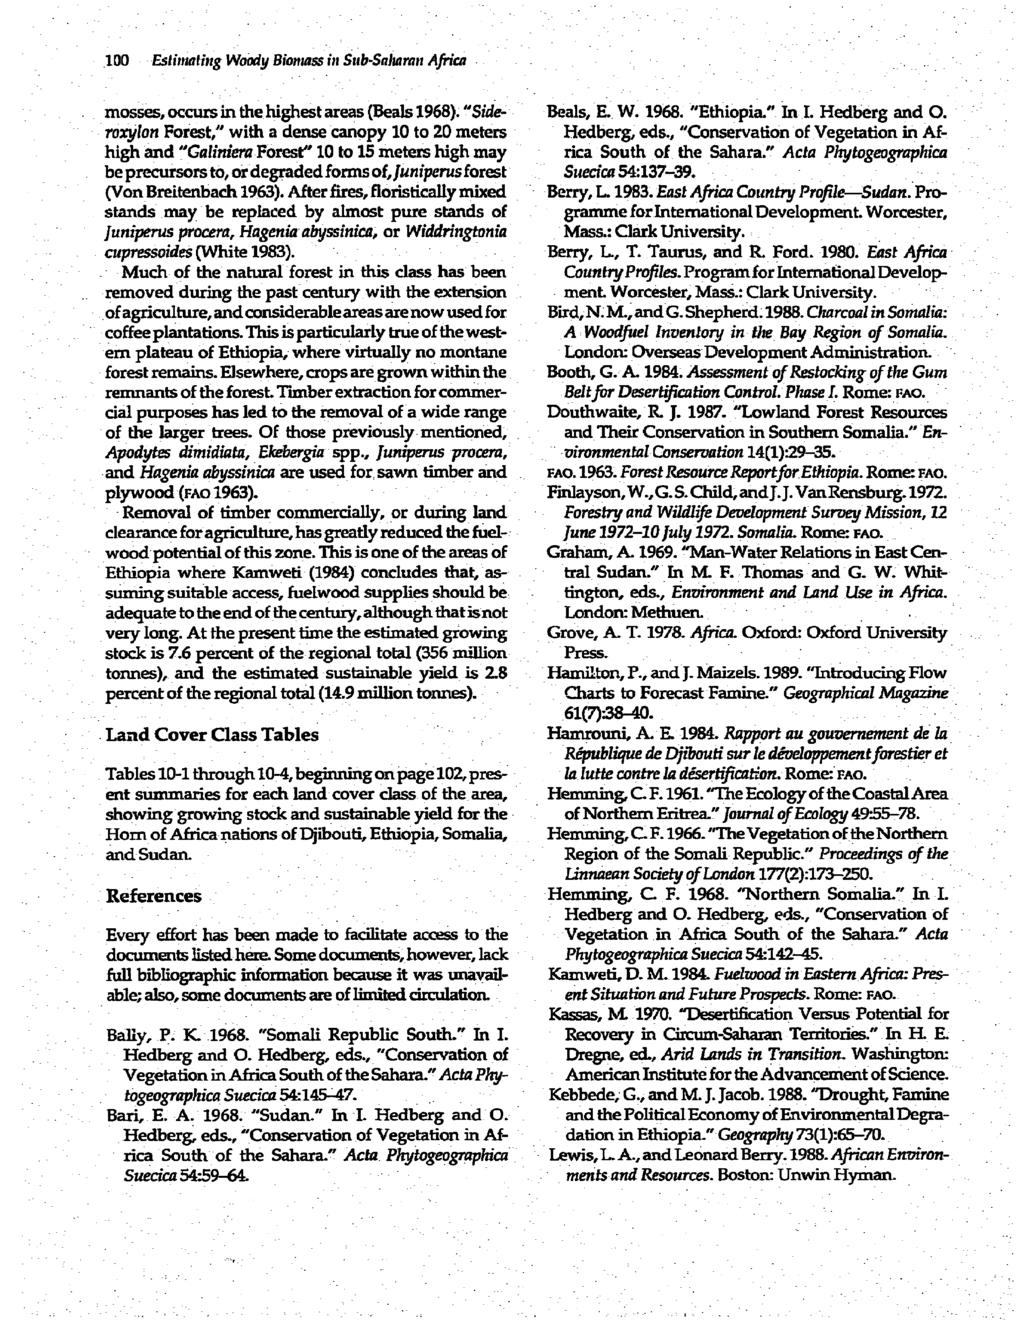 100 Eslittiatitng Woody Bionaass hi Su b-sahmran Africa mosses, occurs in the highest areas (Beals 1968). "Side- Beals, E. W. 1968. "Ethiopia." In 1. Hedberg and 0.